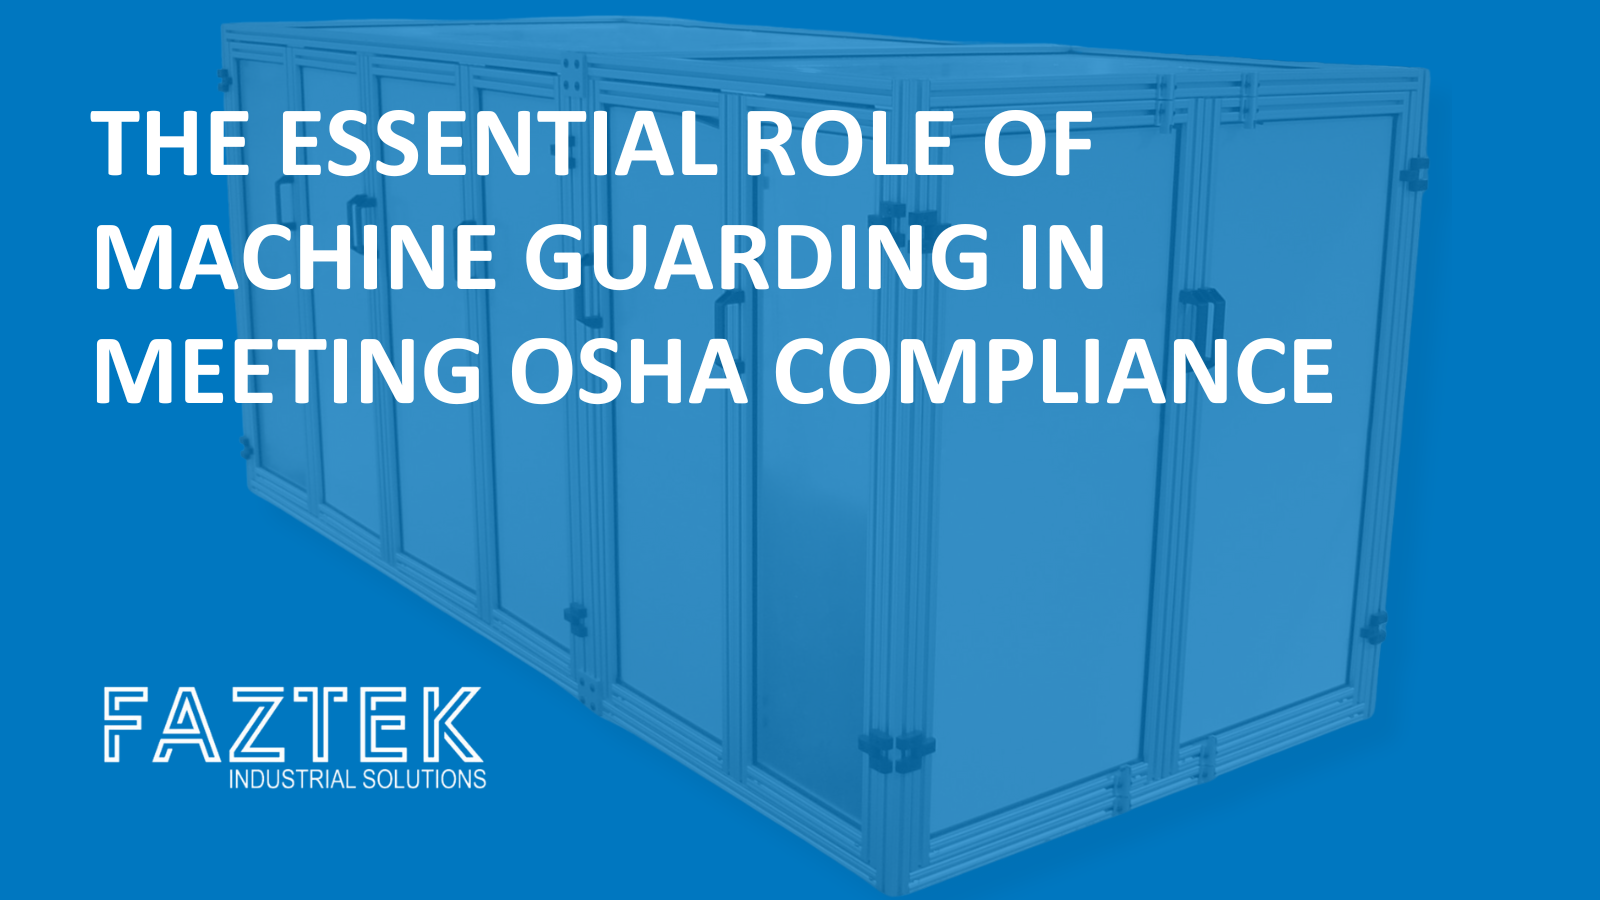 The Essential Role of Machine Guarding in Meeting OSHA Compliance